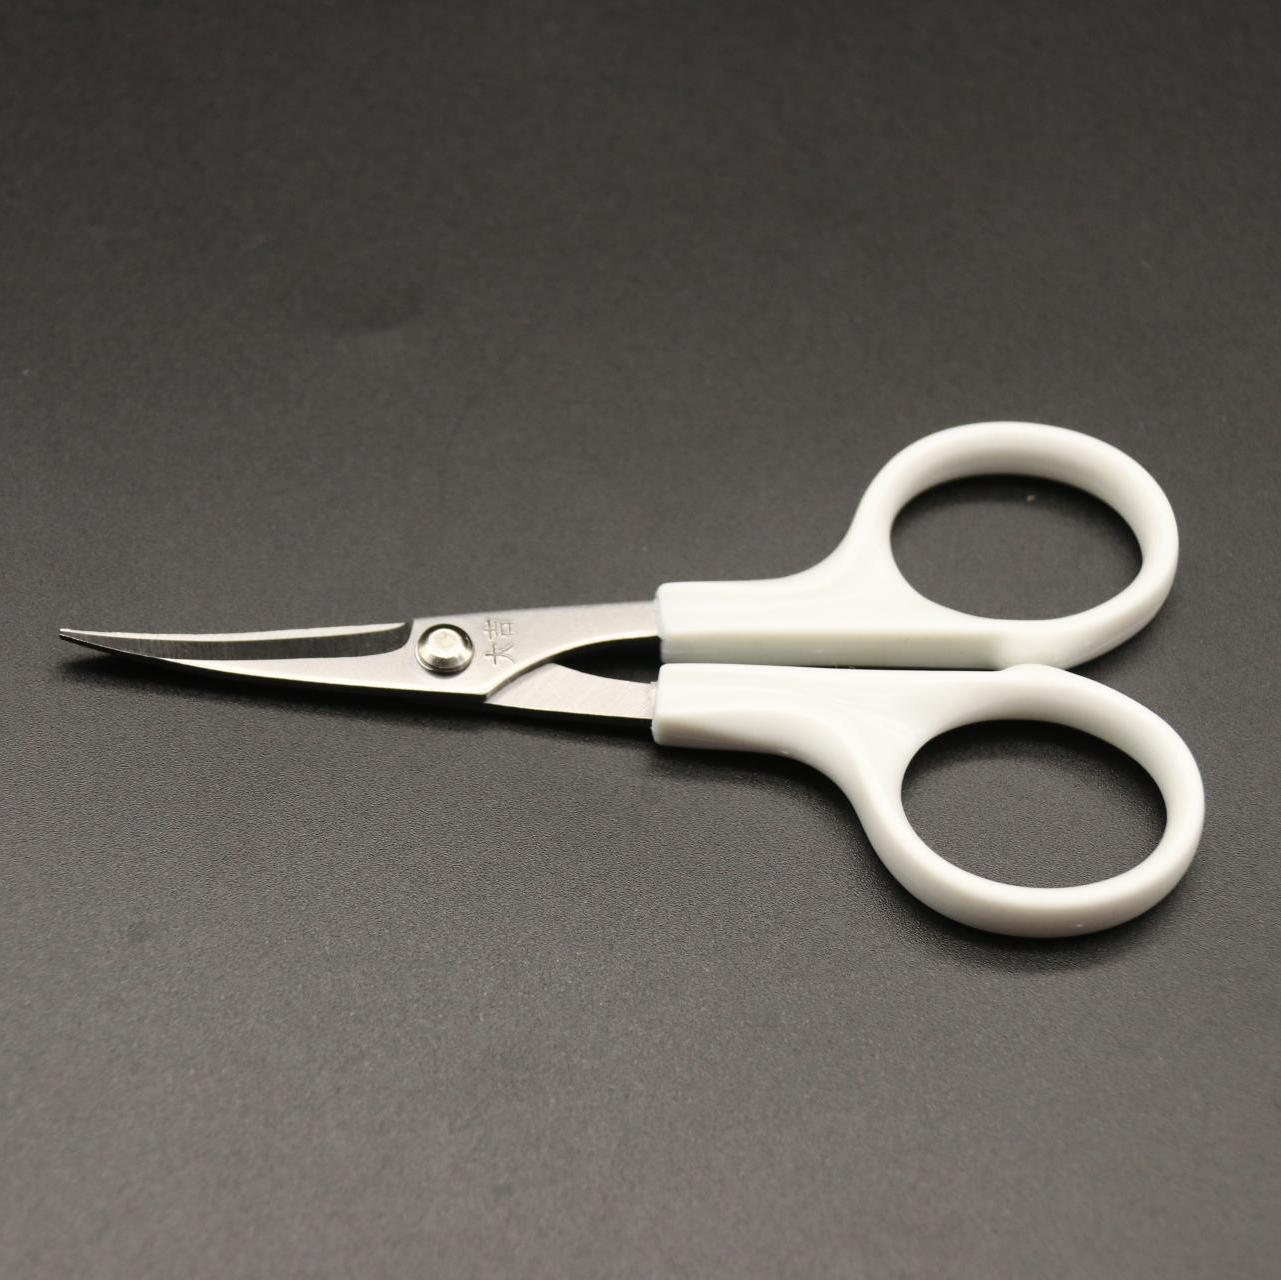 Curved Blade Embroidery Scissors Plastic For Thread Cutting